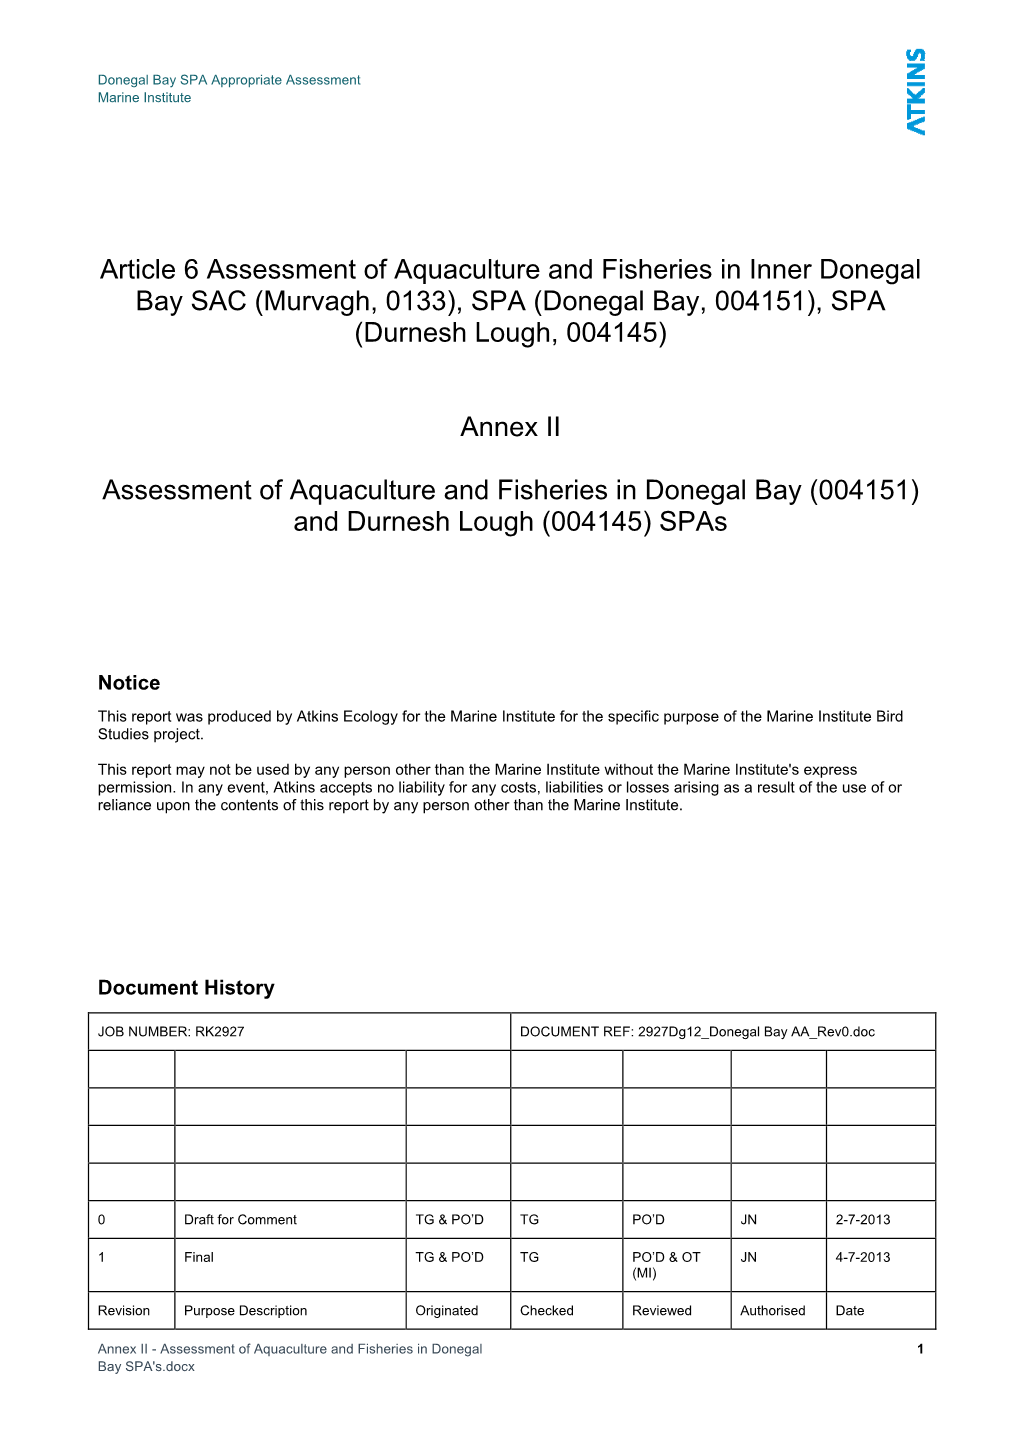 Assessment of Aquaculture and Fisheries in Donegal Bay SPA's.Docx